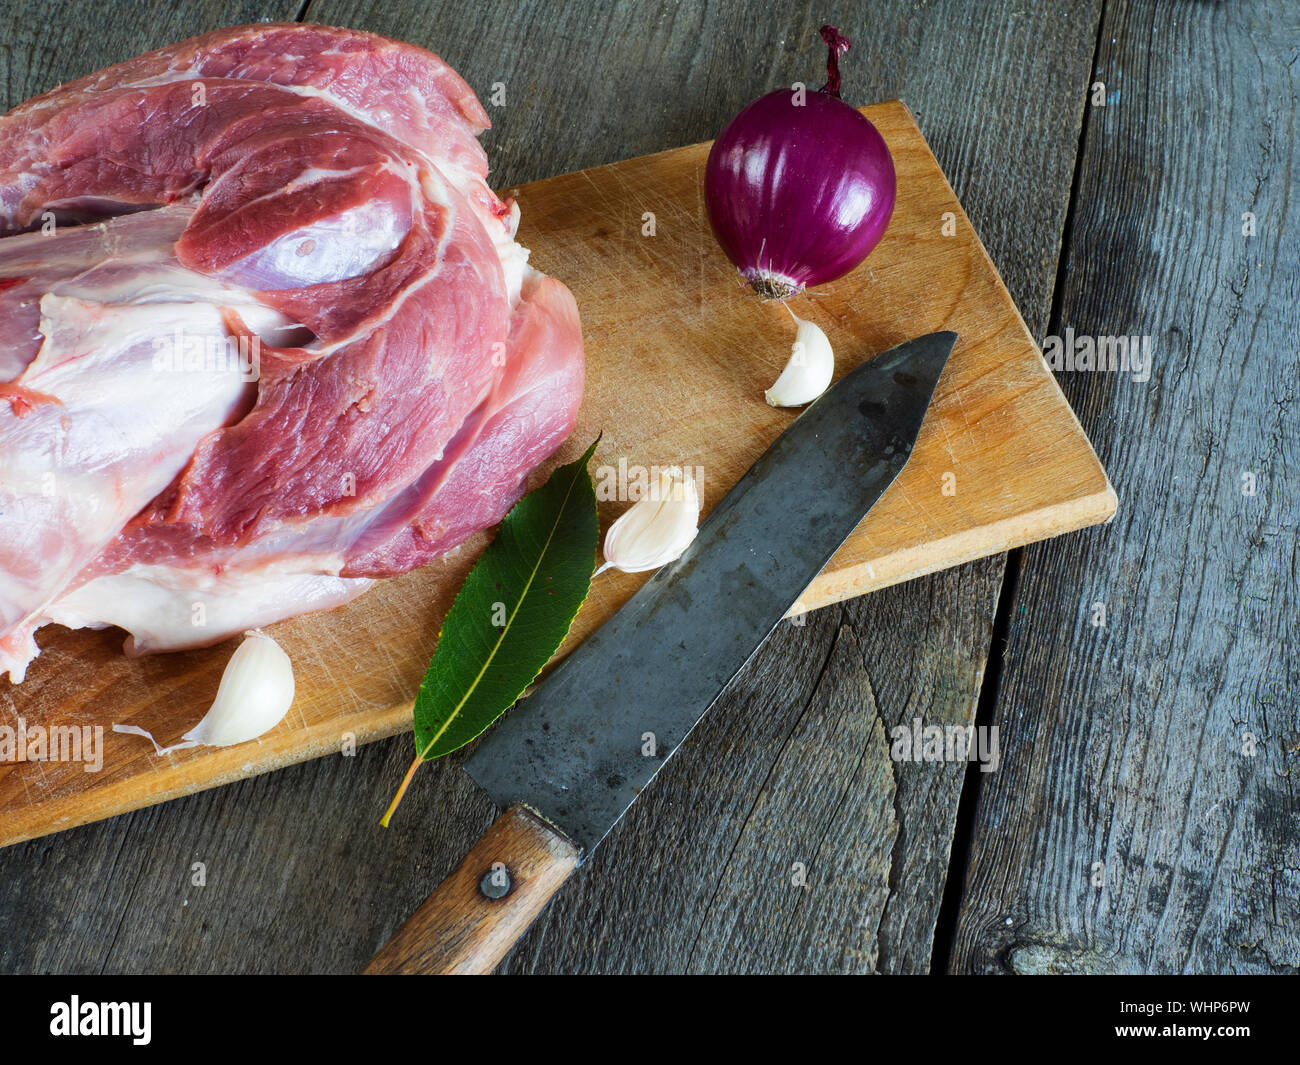 High Angle View Of Raw Food On Wooden Table Stock Photo